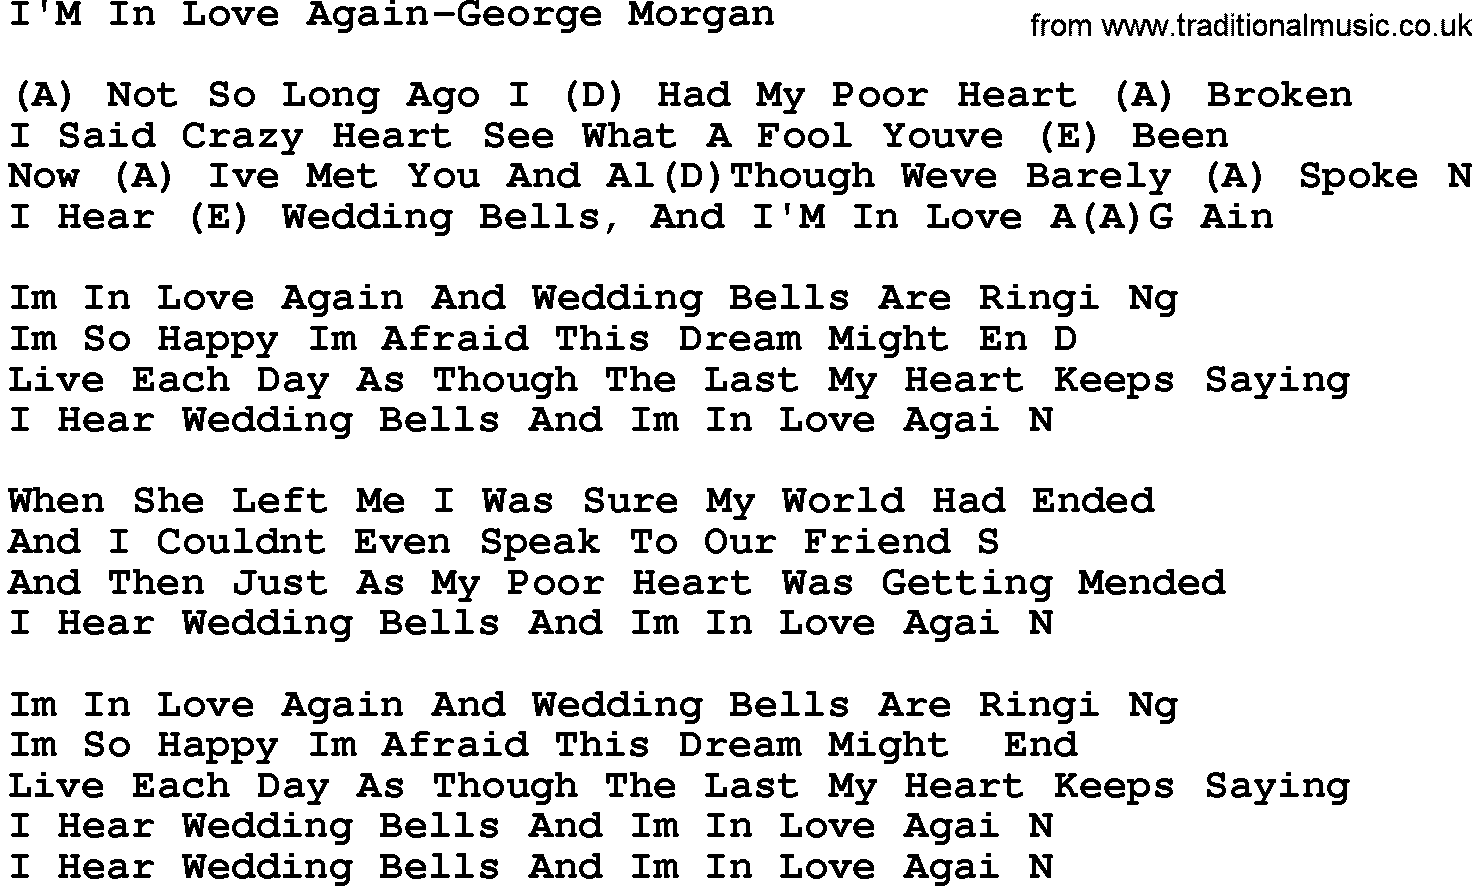 Country music song: I'm In Love Again-George Morgan lyrics and chords